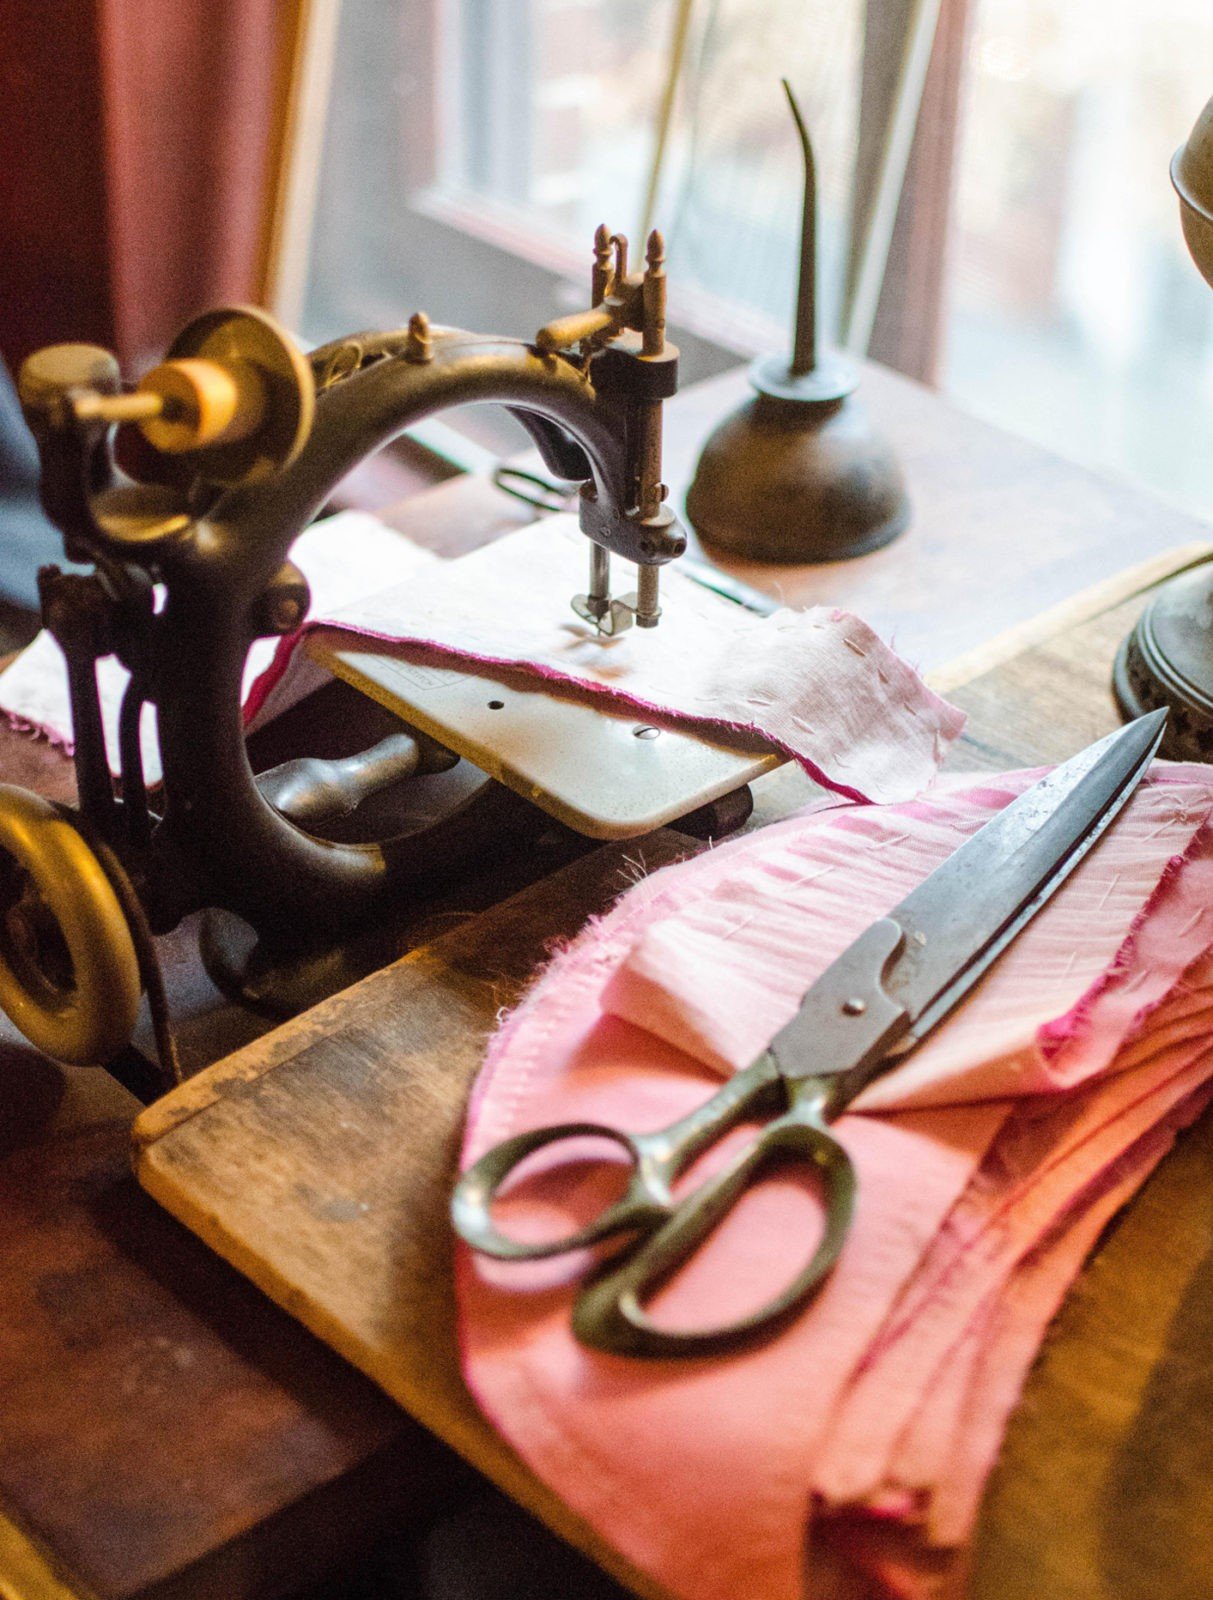 A strip of pink fabric is between the needle and base of an old wooden sewing machine next to a pair of metal scissors